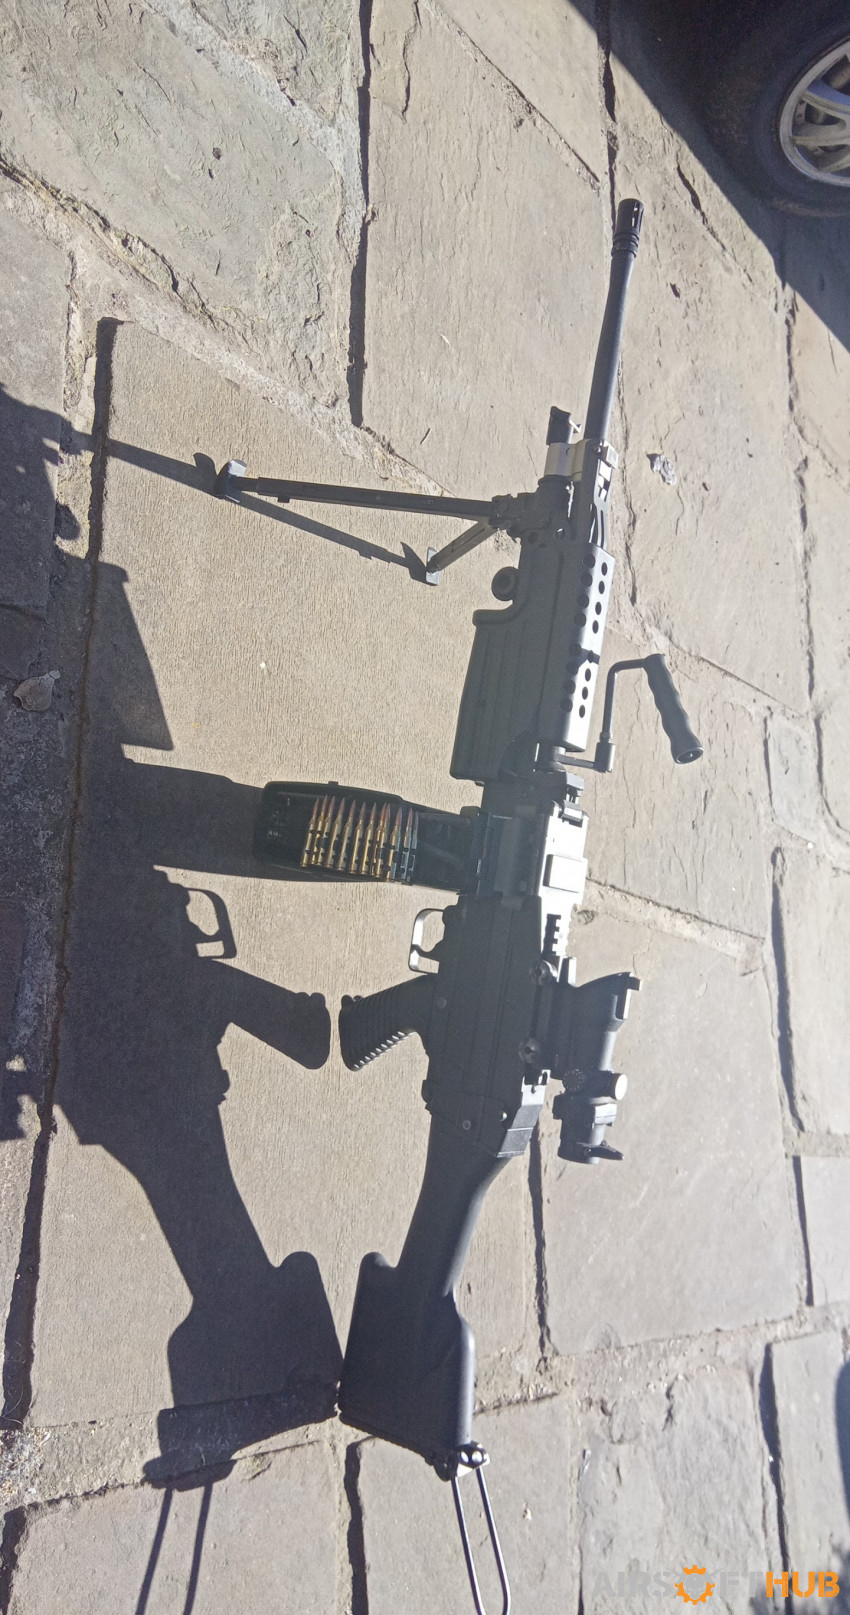 M249 fully automatic - Used airsoft equipment